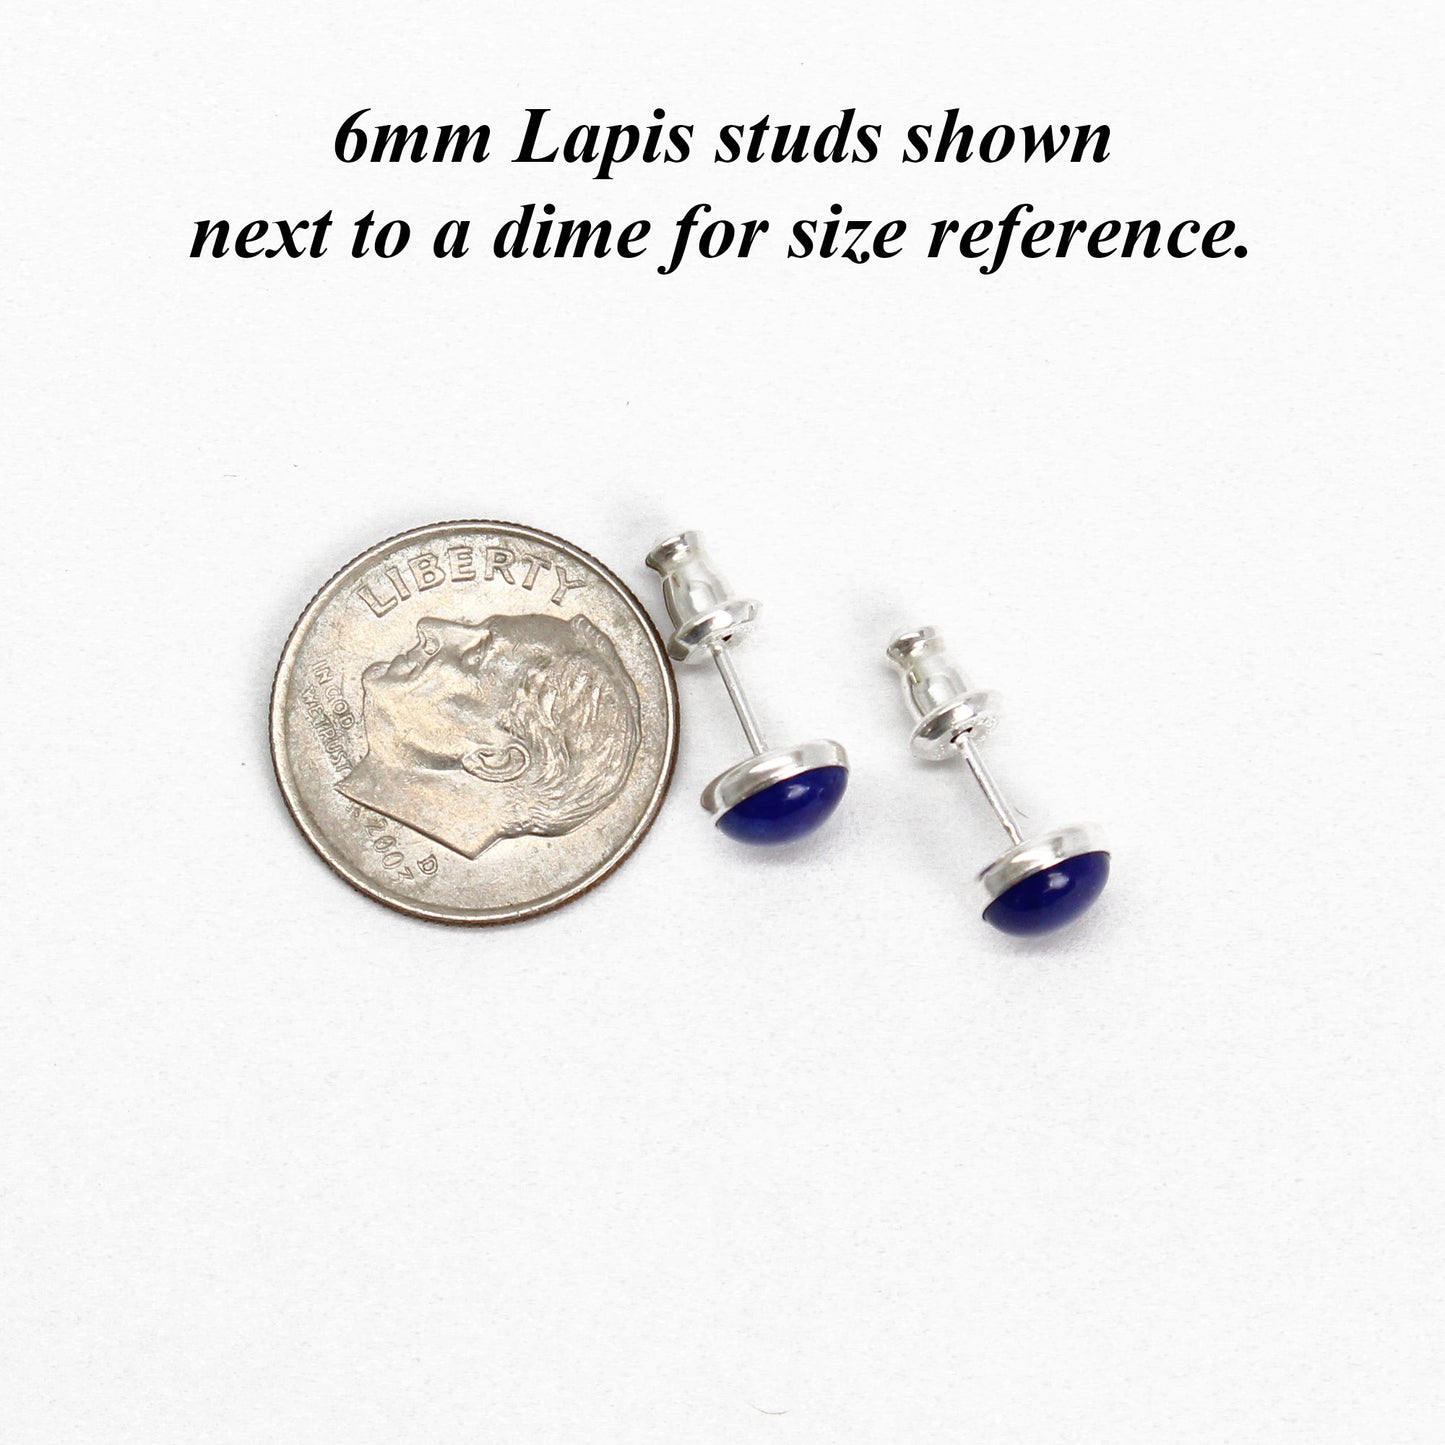 Lapis Stud Earrings, 6mm Small Dark Blue Studs in Sterling Silver or Gold Fill